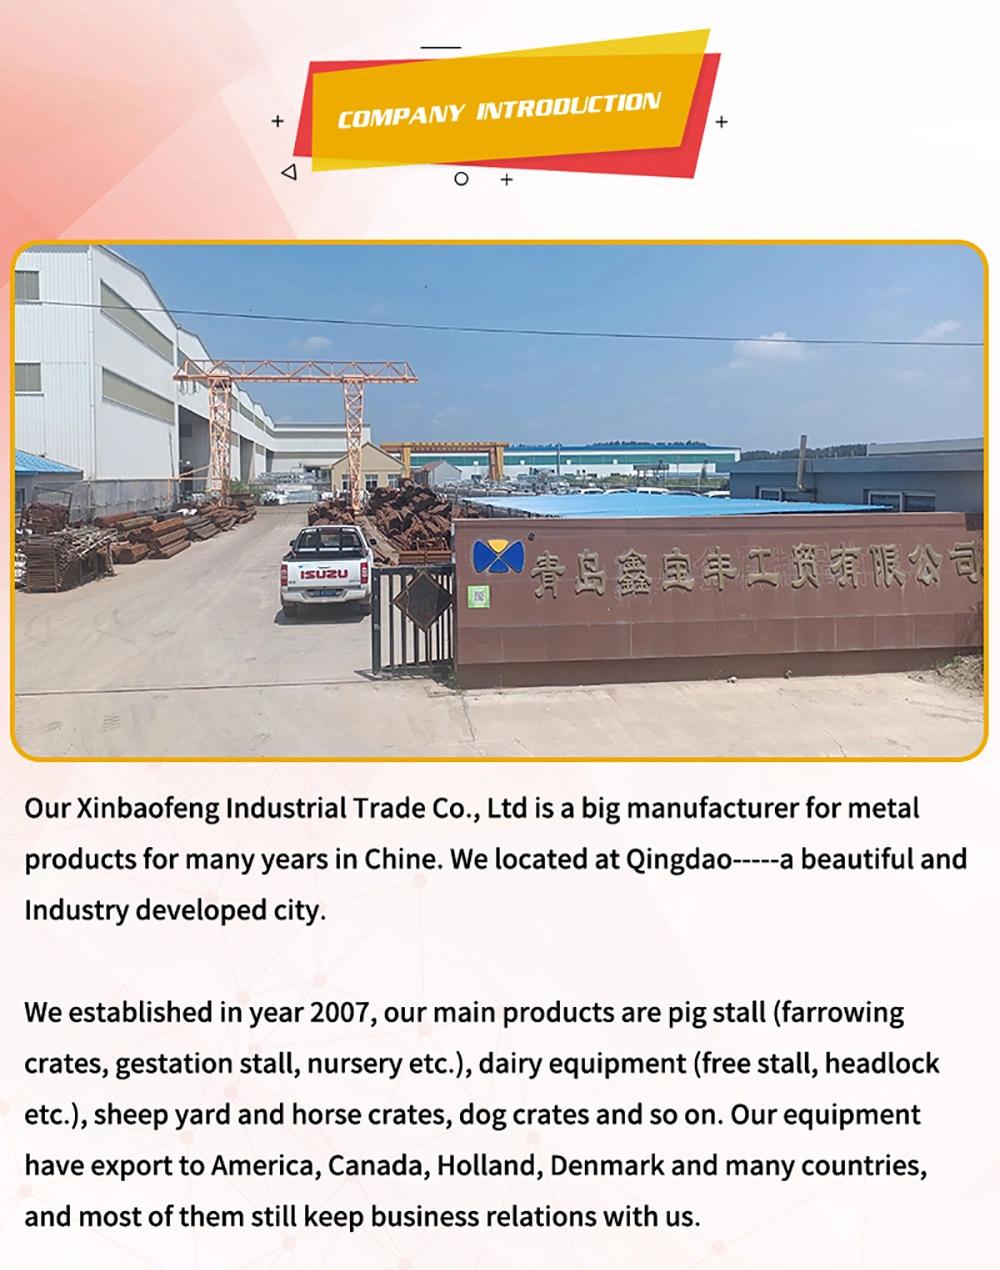 China-Made Agricultural Equipment, Livestock Equipment, Hot-DIP Galvanized Fence, Yard Fence, Cattle and Horse Fence, Panel Sheep Fence